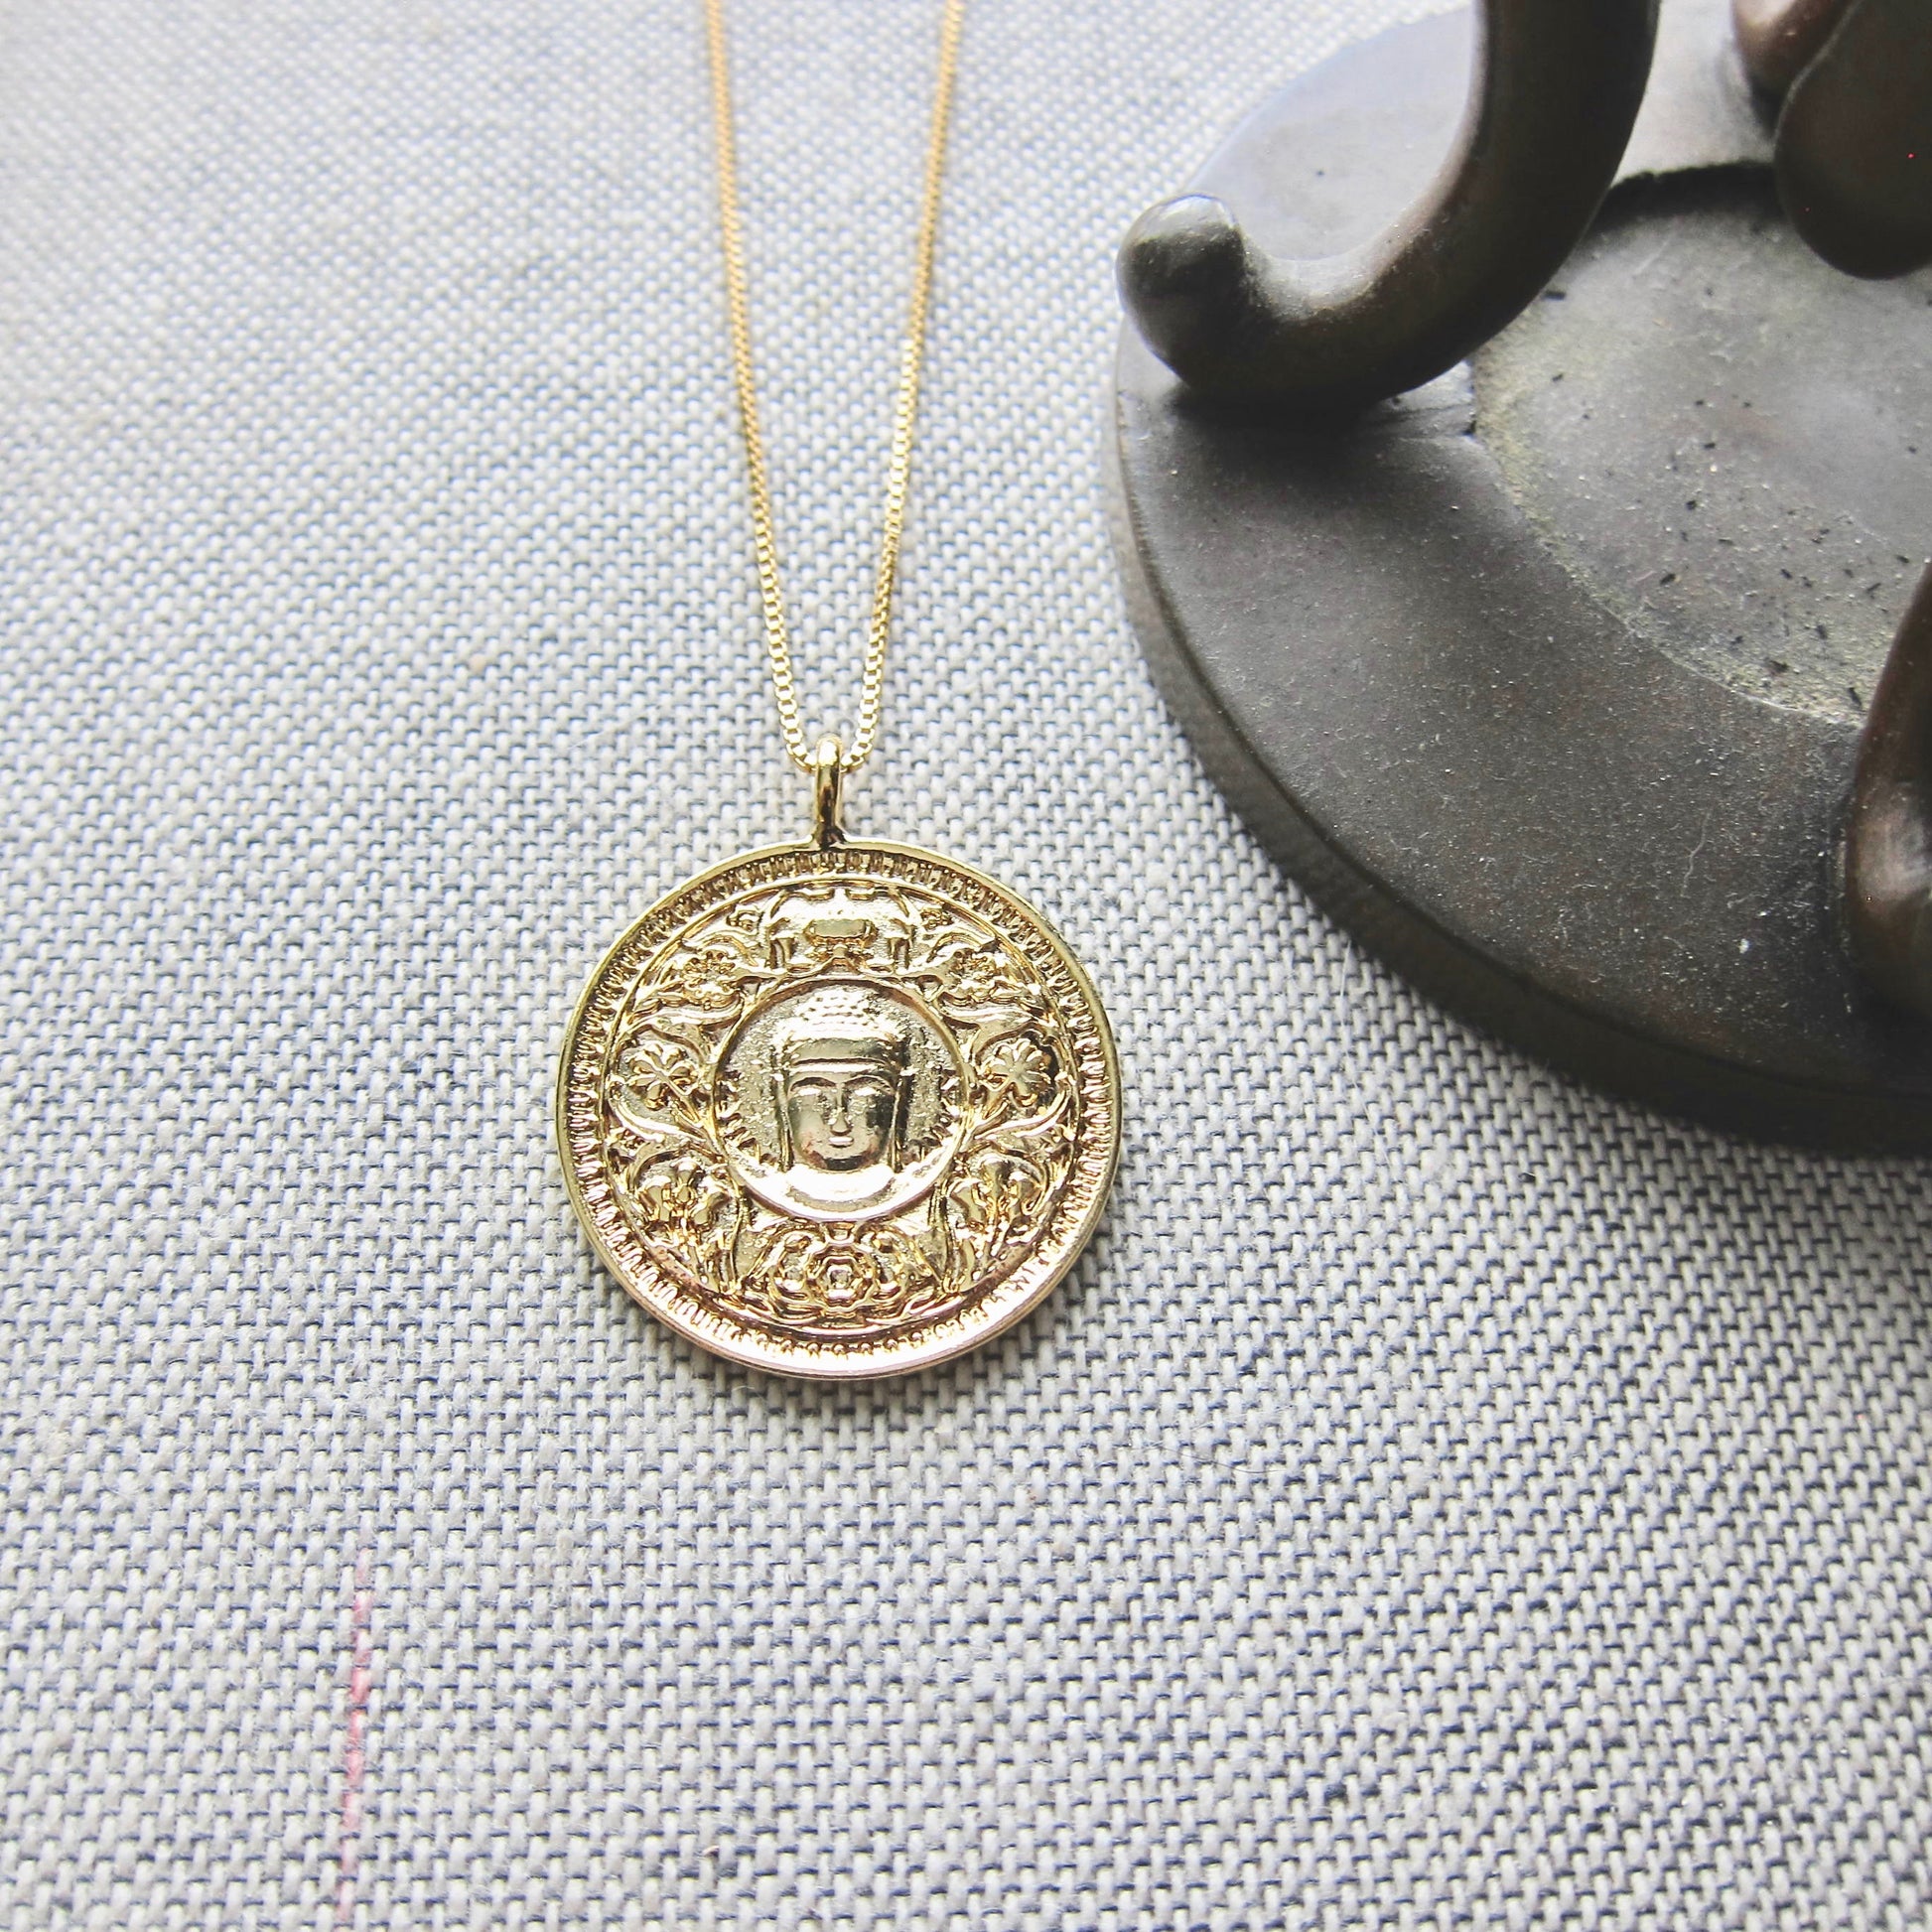 Solid Gold Coin Necklace, 14k Gold Necklace, Gold Coin Pendant Necklace,  Antique Necklace, British Coin Gold Necklace, 14k Gold Necklace -   Canada